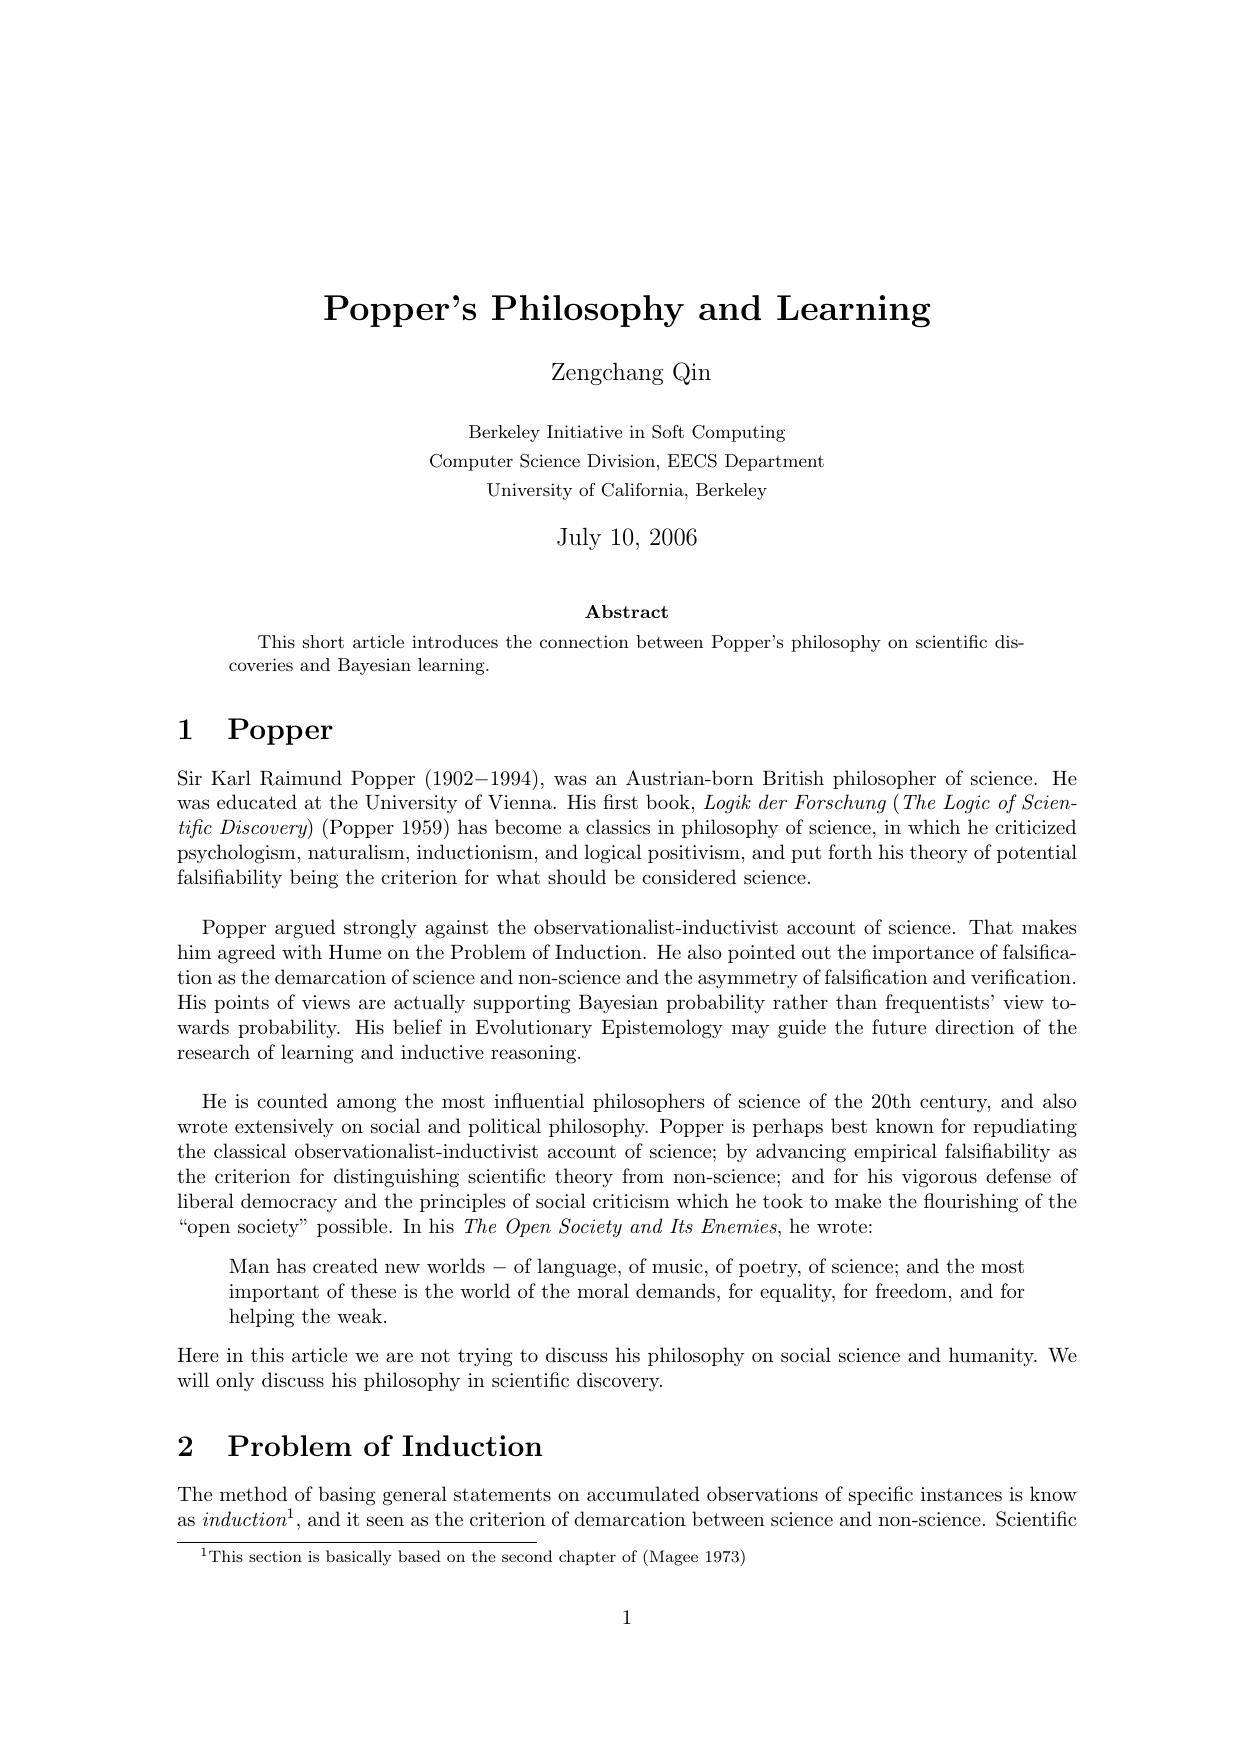 Popper’s Philosophy and Learning - Article